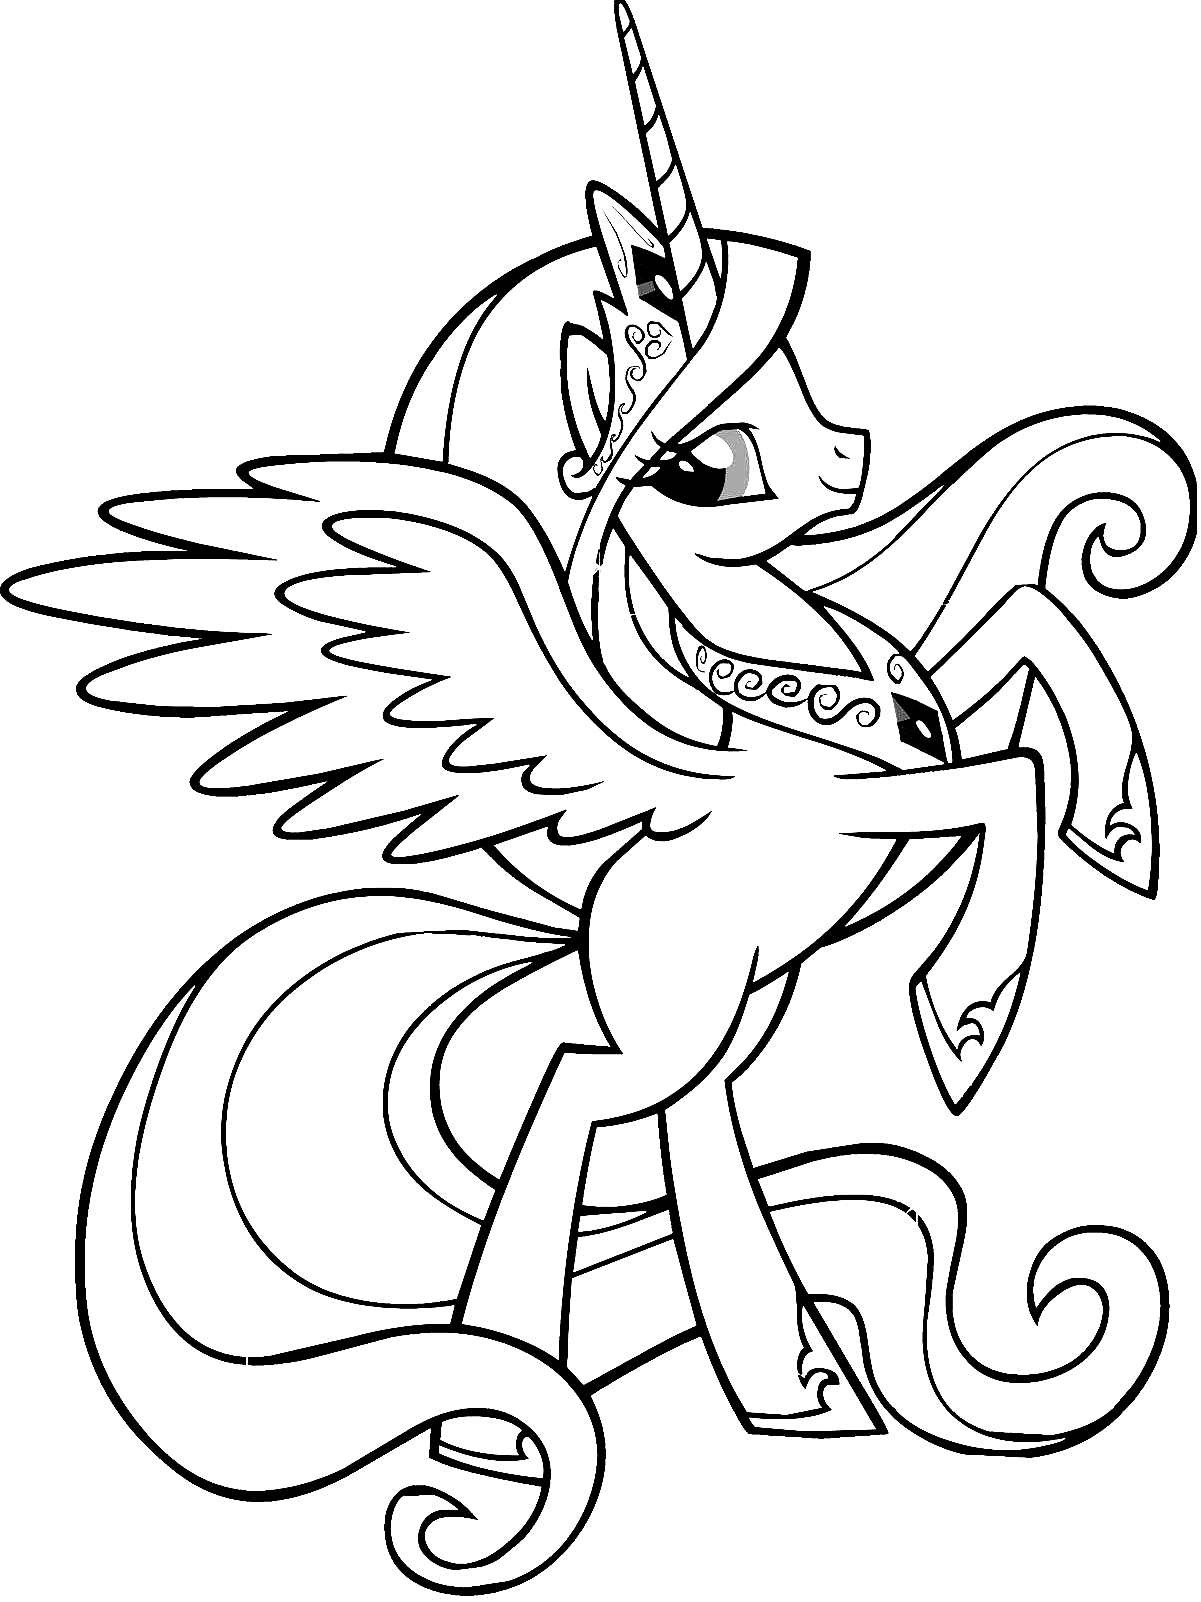 Cute Unicorn-image 4 Coloring Pages